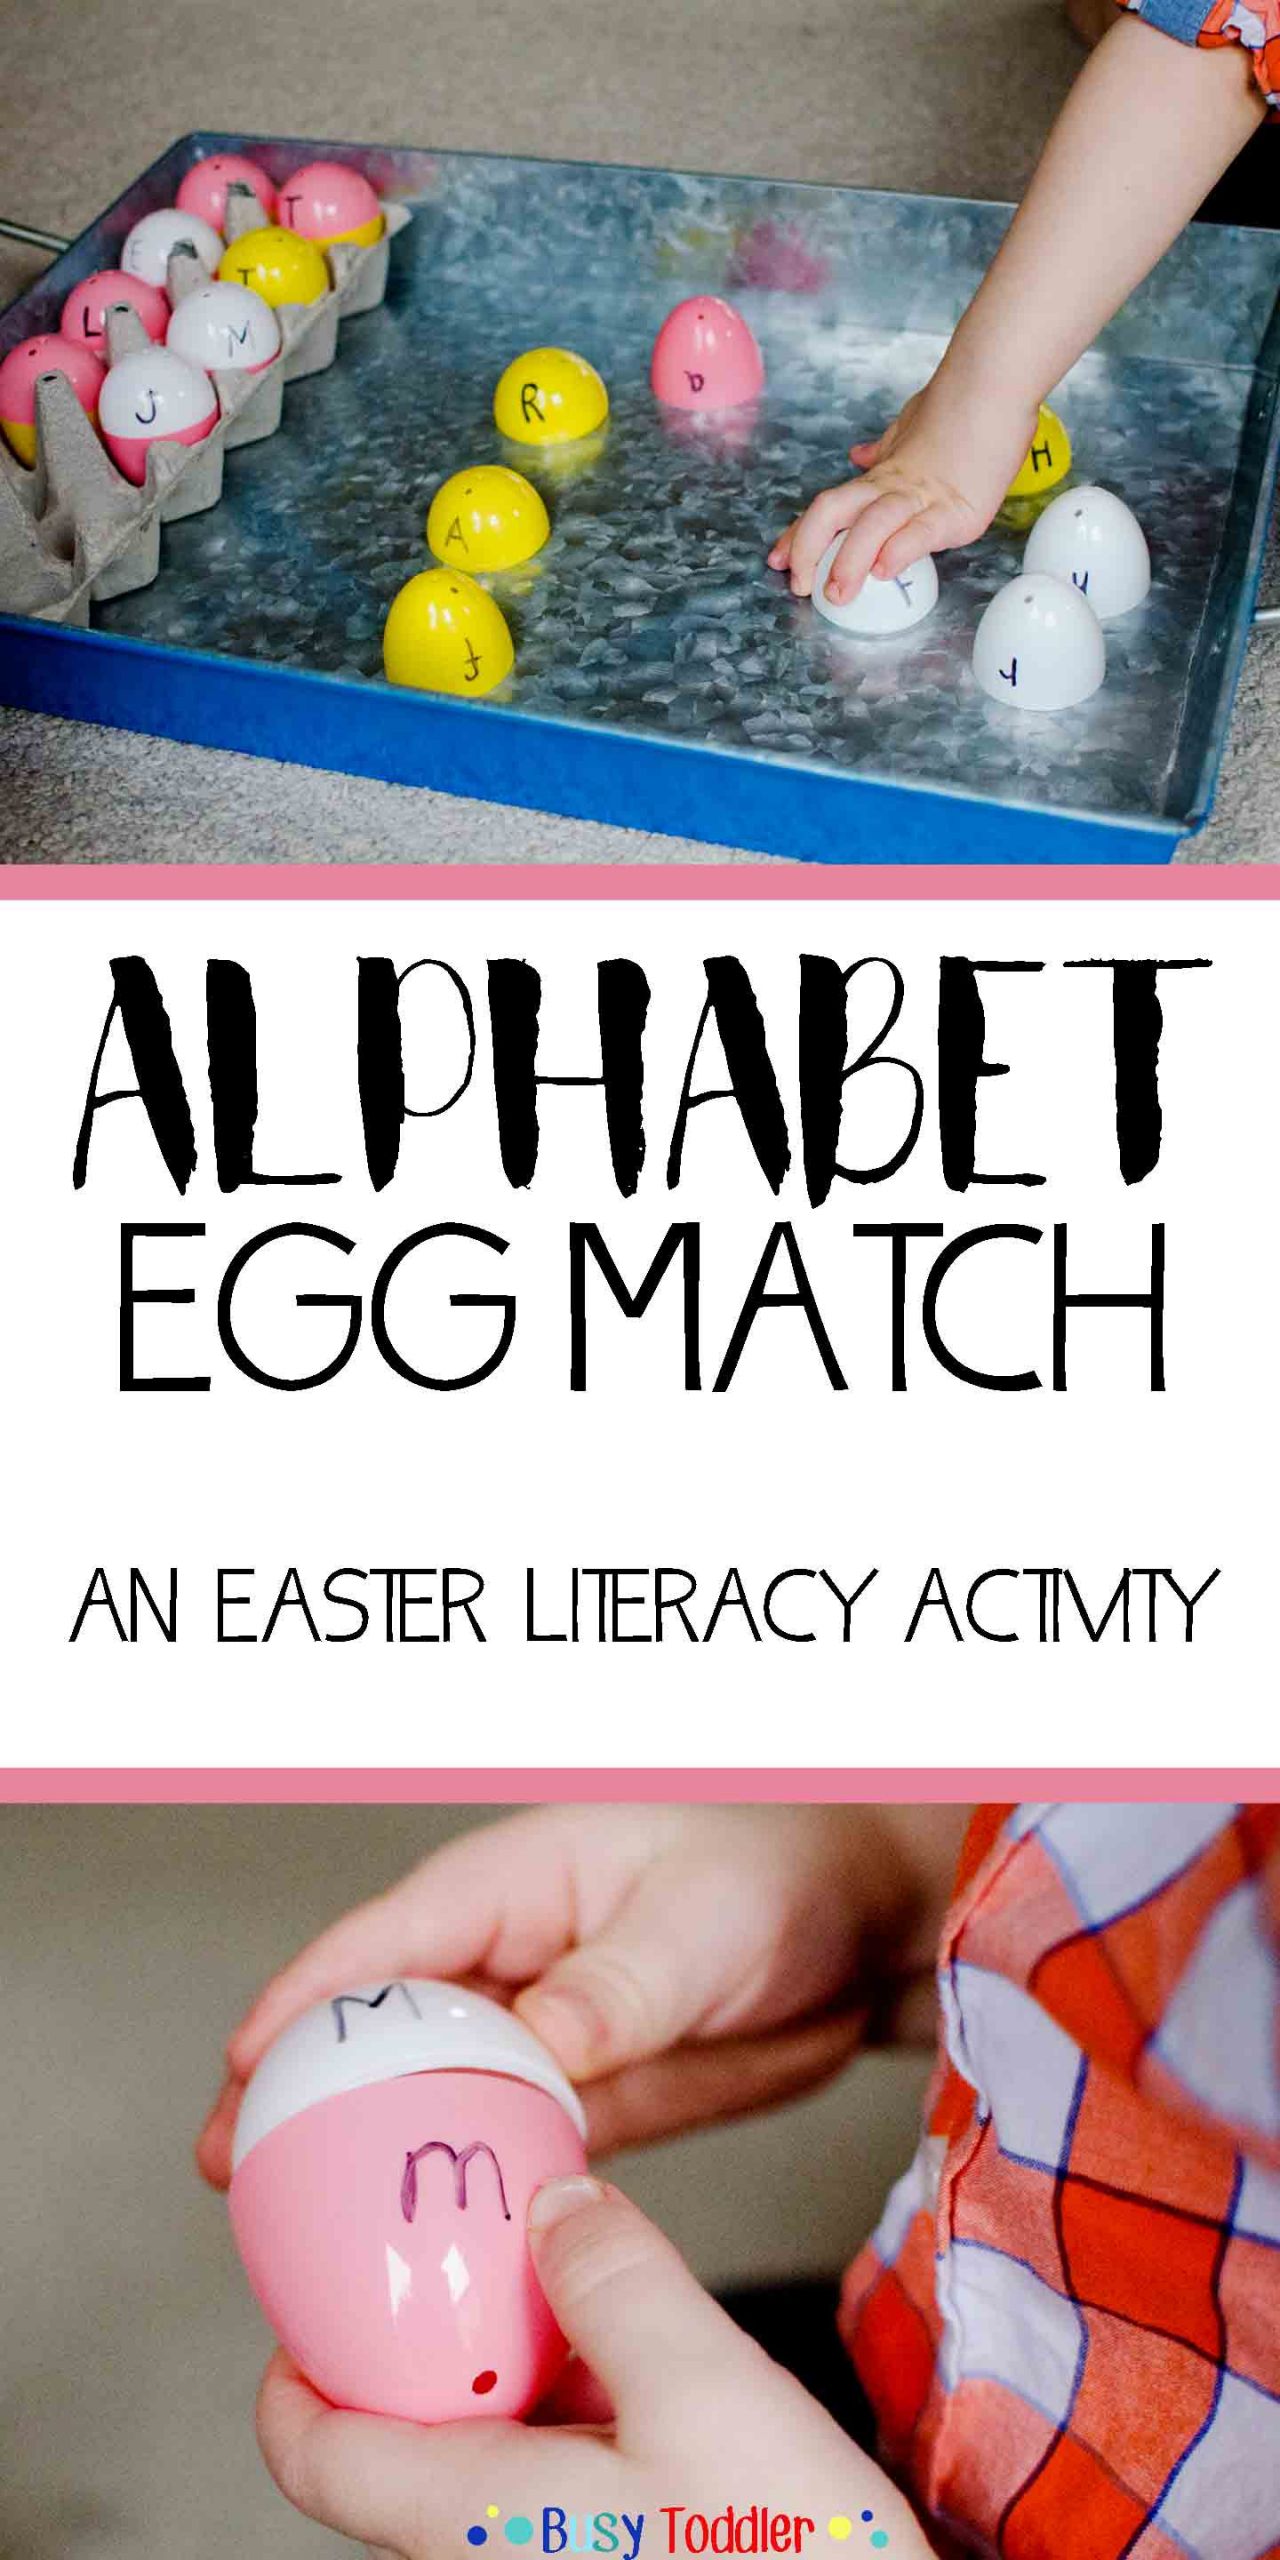 Kindergarten Easter Party Ideas
 ABC Easter Egg Match Busy Toddler